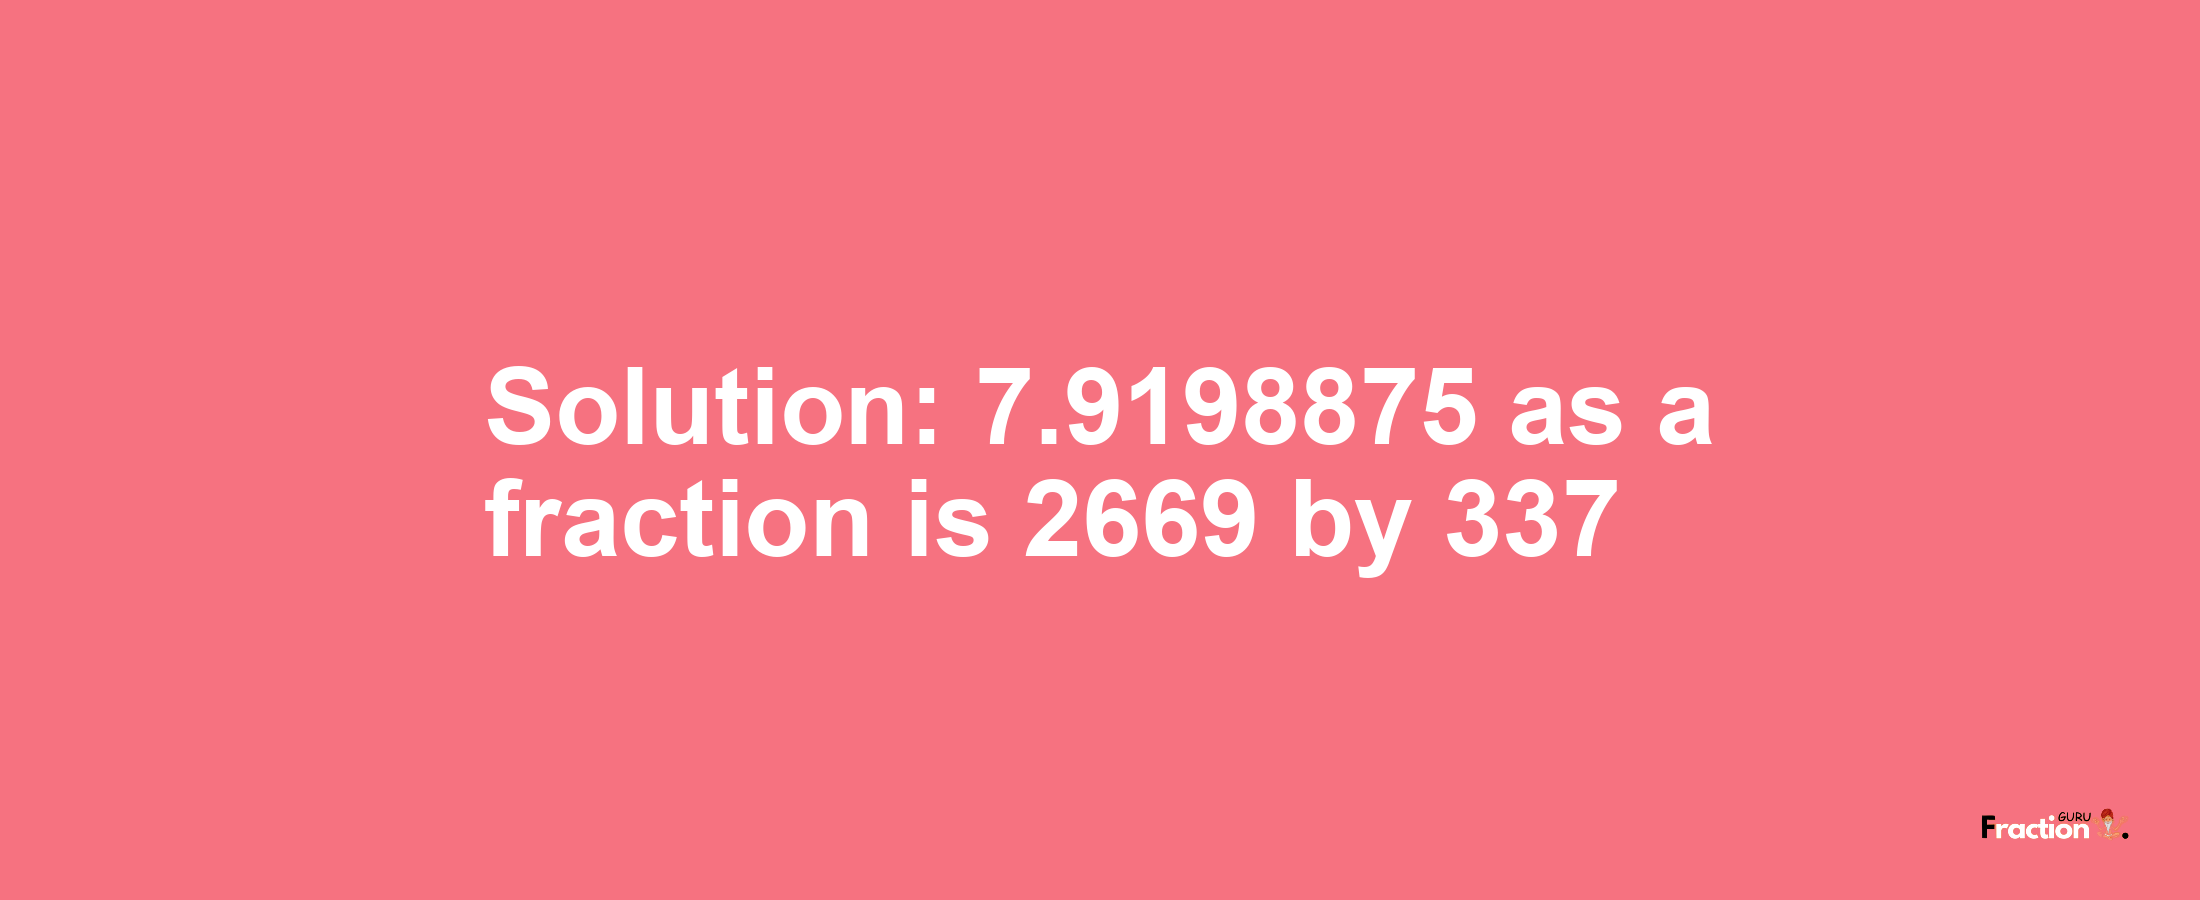 Solution:7.9198875 as a fraction is 2669/337